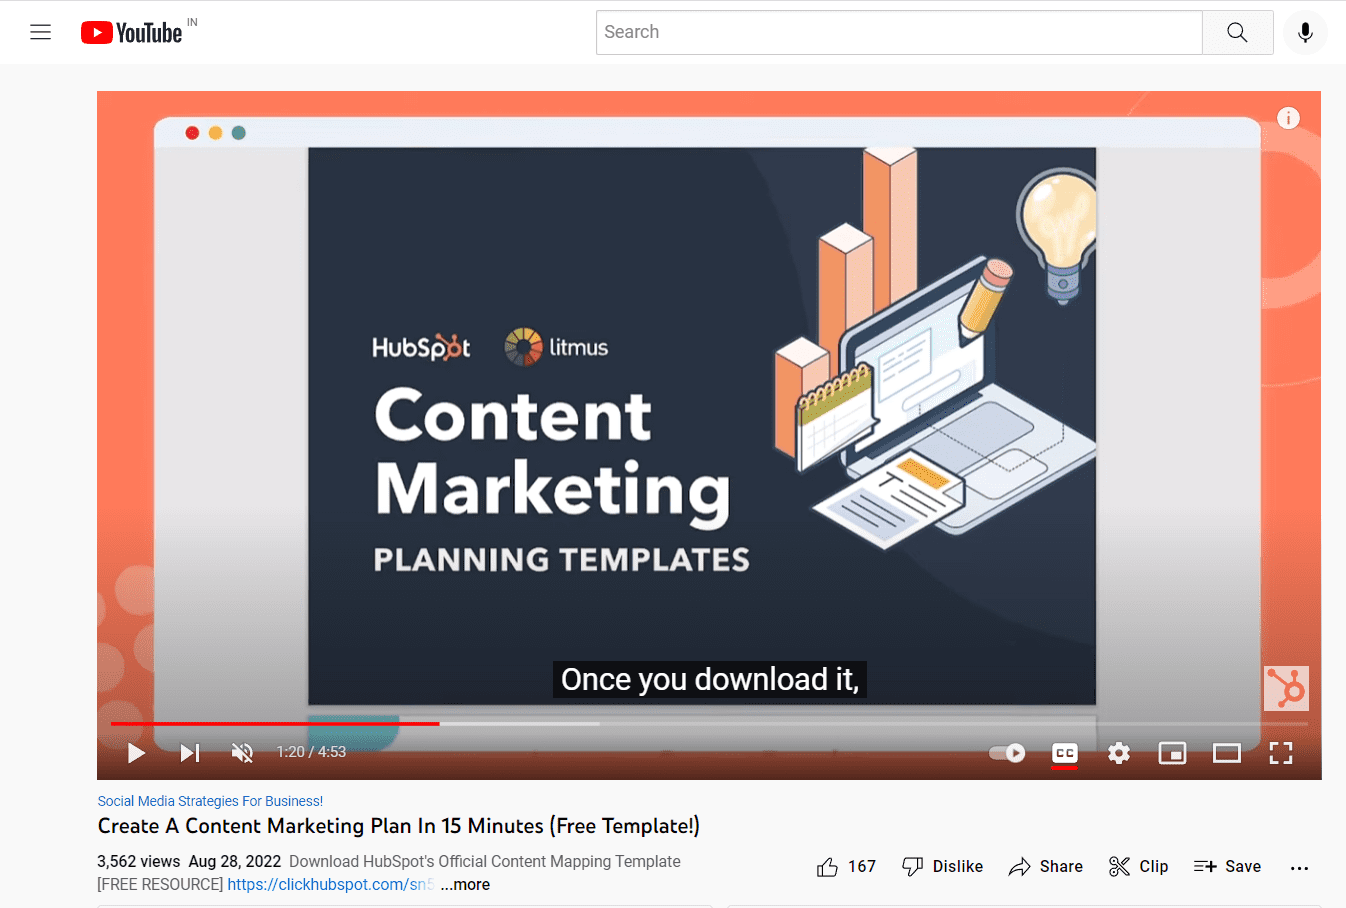 Product-led marketing content types - Video example